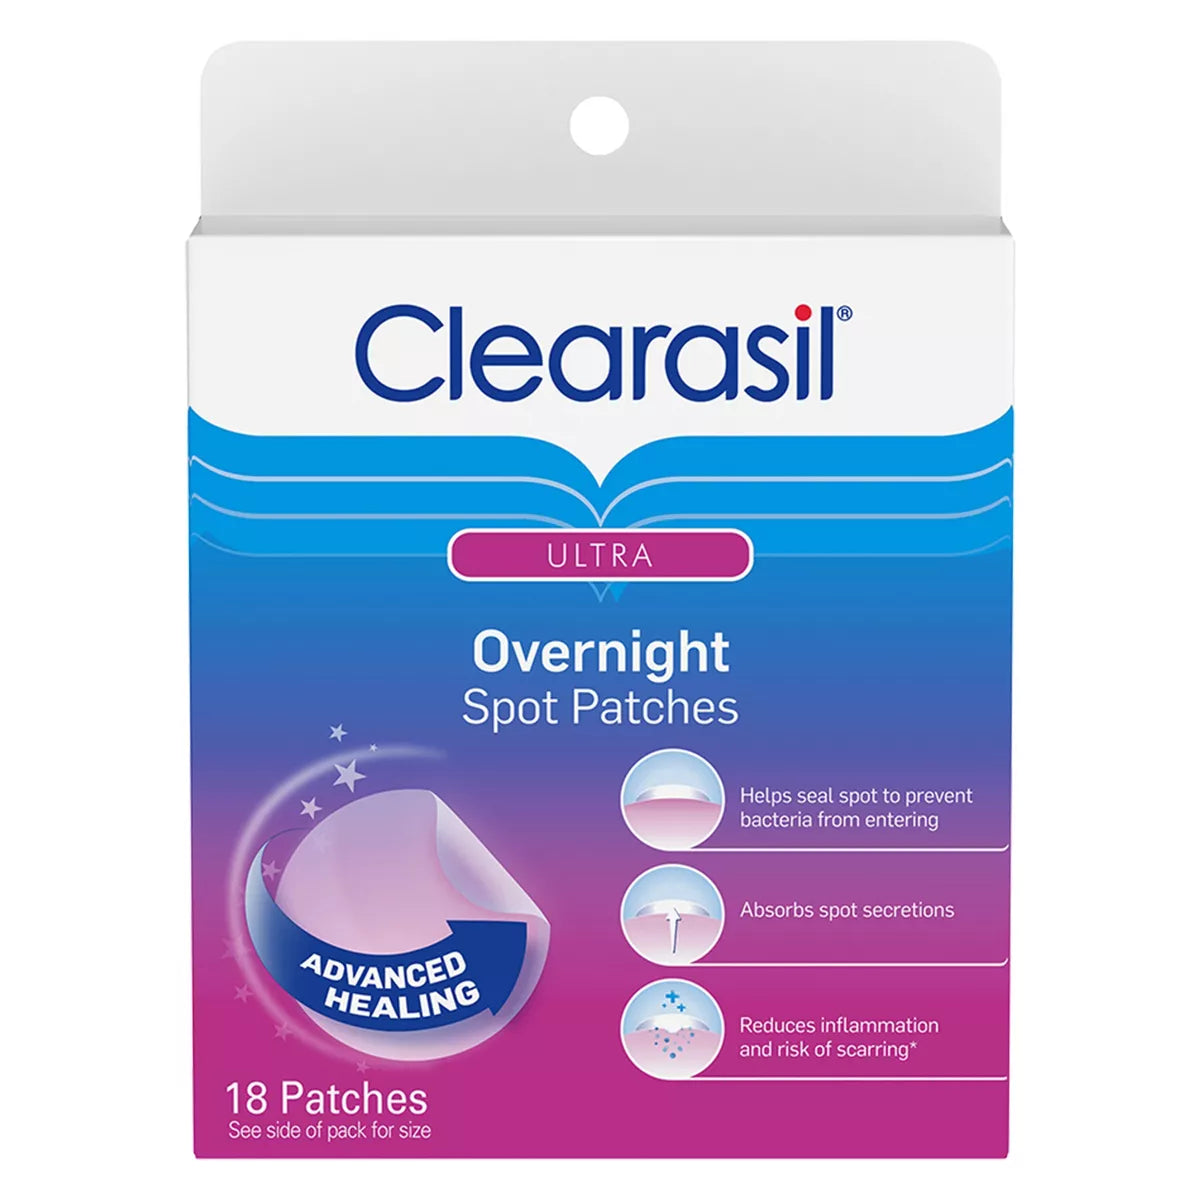 Clearasil Overnight Spot Patches: Tratamiento Nocturno del Acné